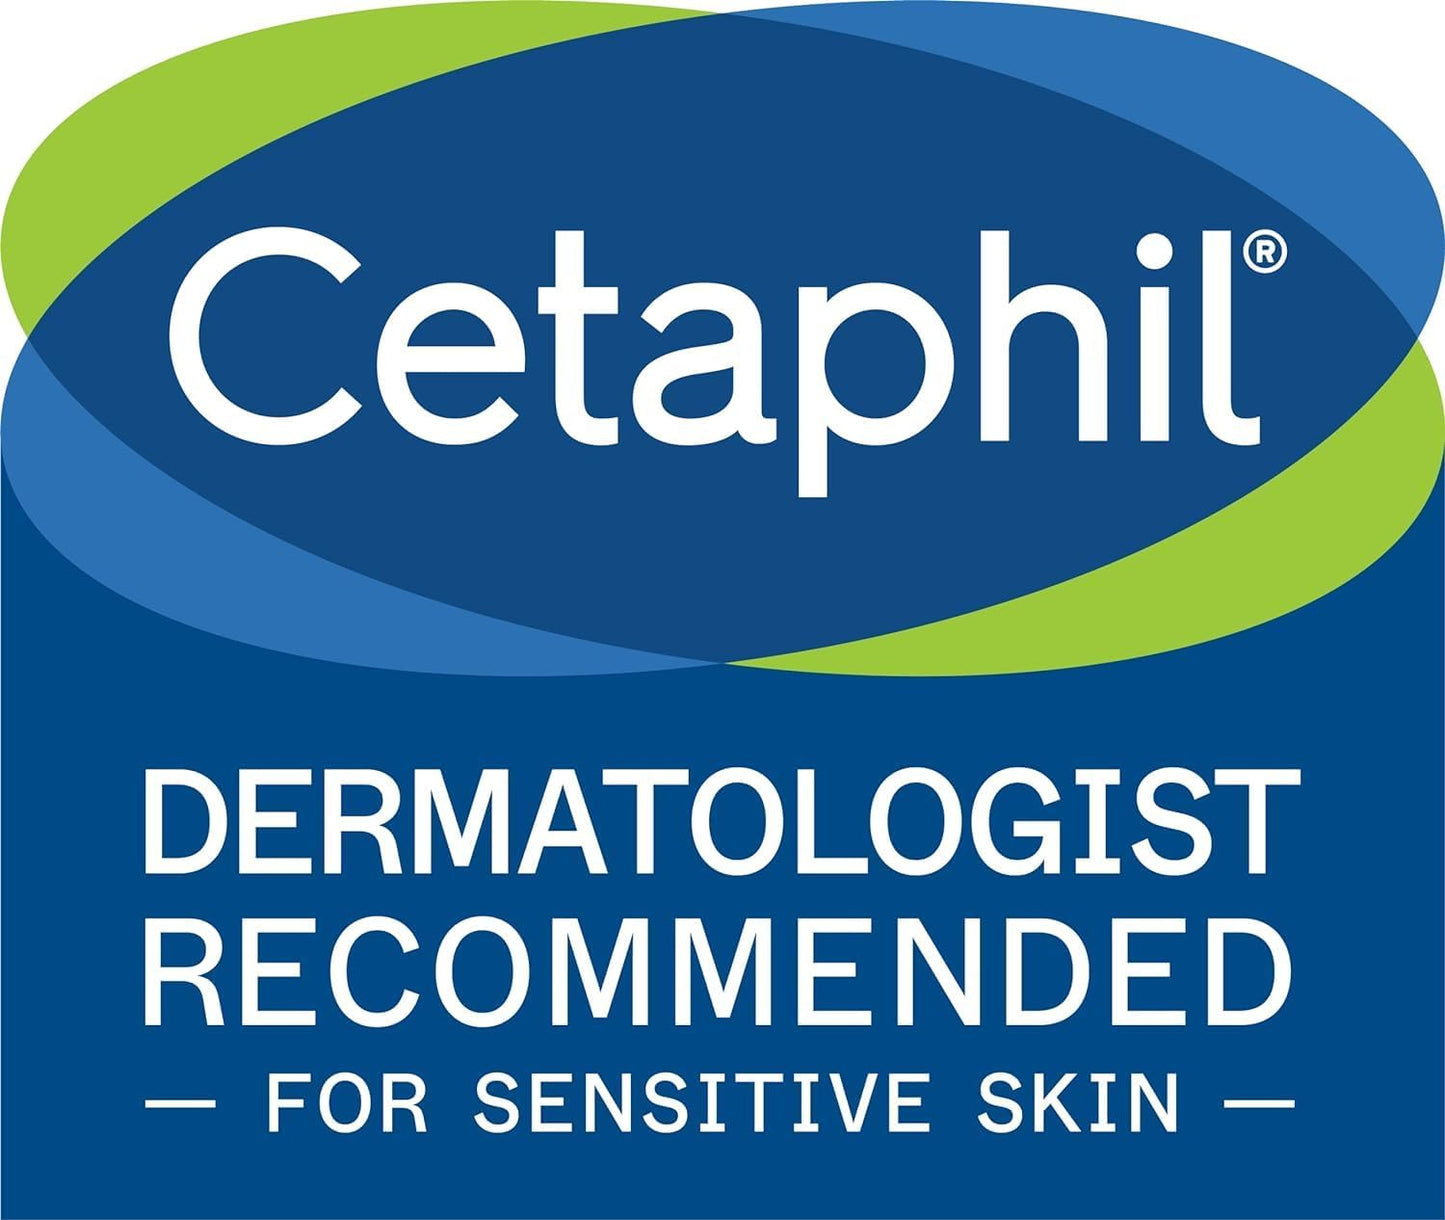 CETAPHIL Face Wash by , Hydrating Gentle Skin Cleanser for Dry to Normal Sensitive Skin, NEW 20 oz, Fragrance Free, Soap Free and Non-Foaming